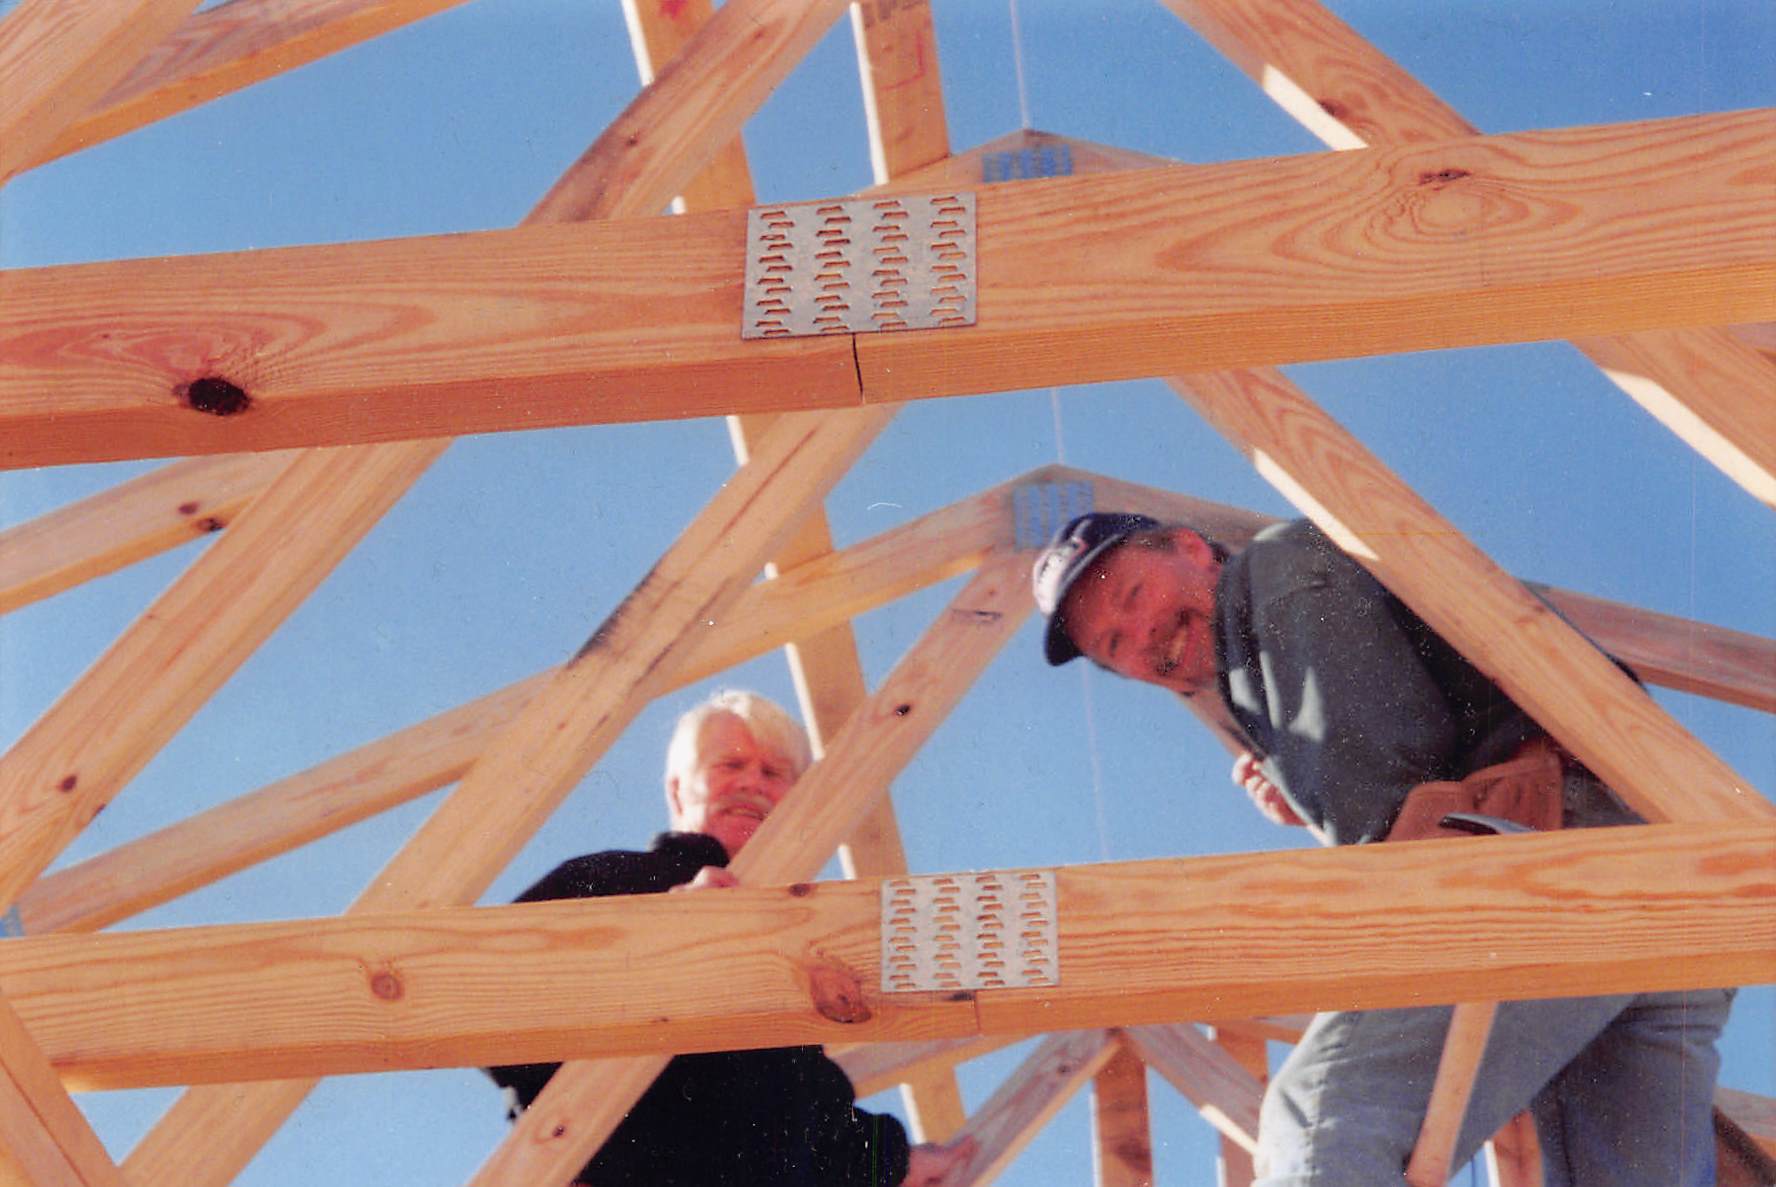 Roof trusses on Habitat for Humanity house